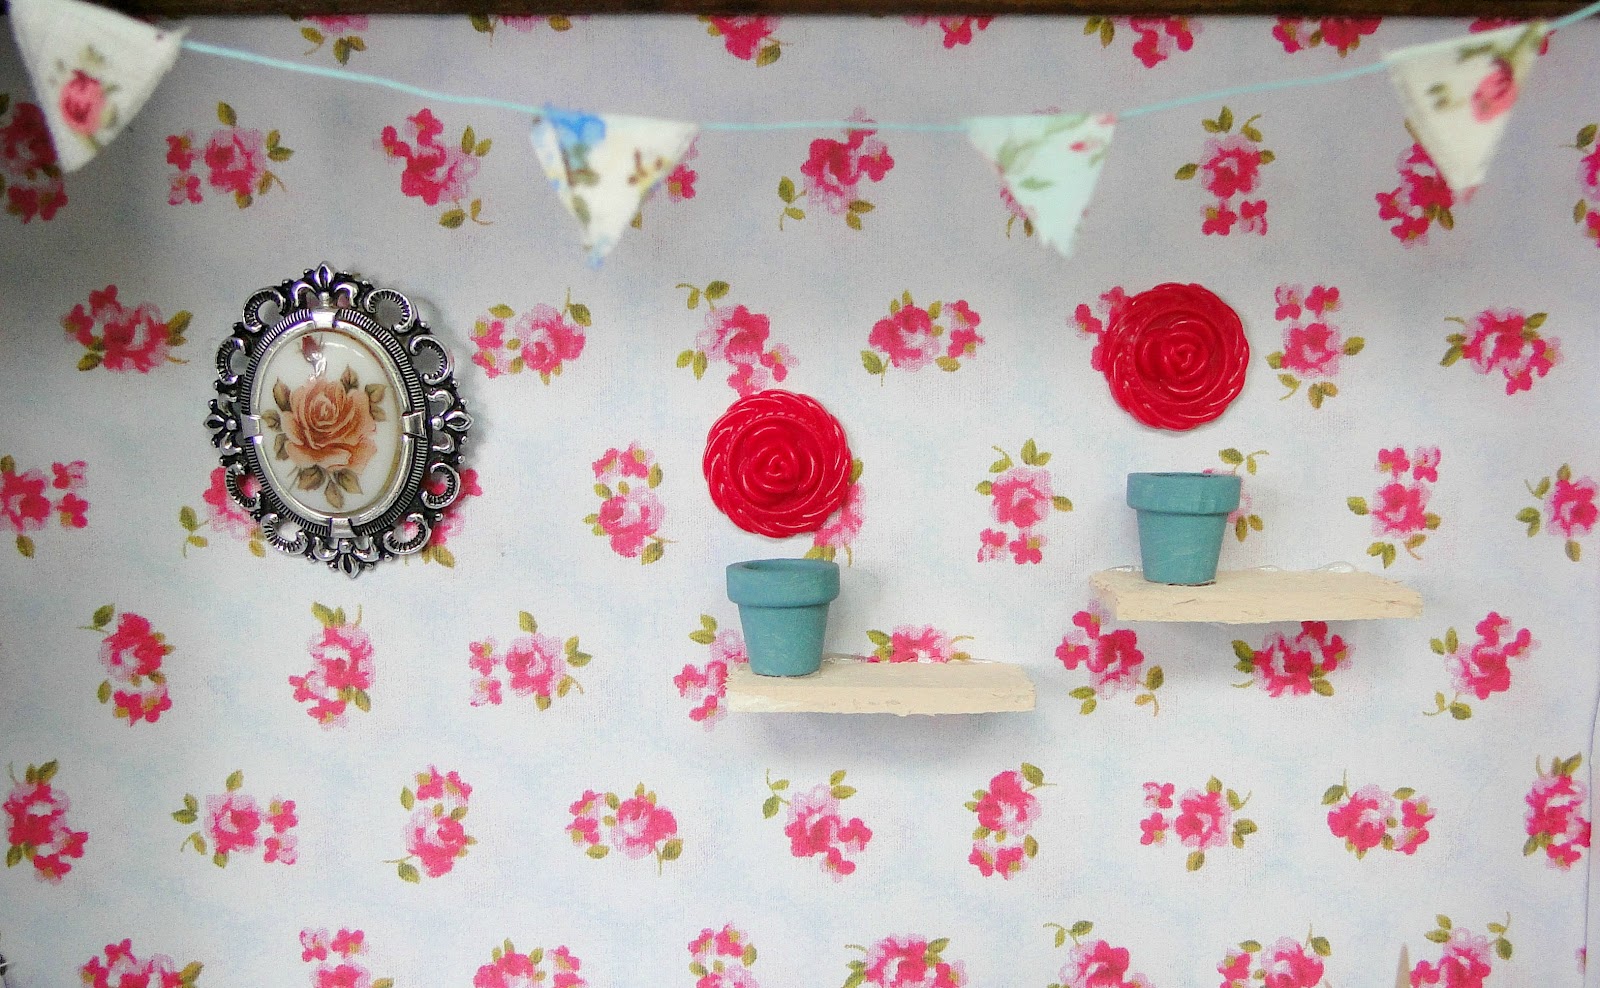 Cath Kidston 'Make Your Dream Room in a Shoebox' Competition Entry